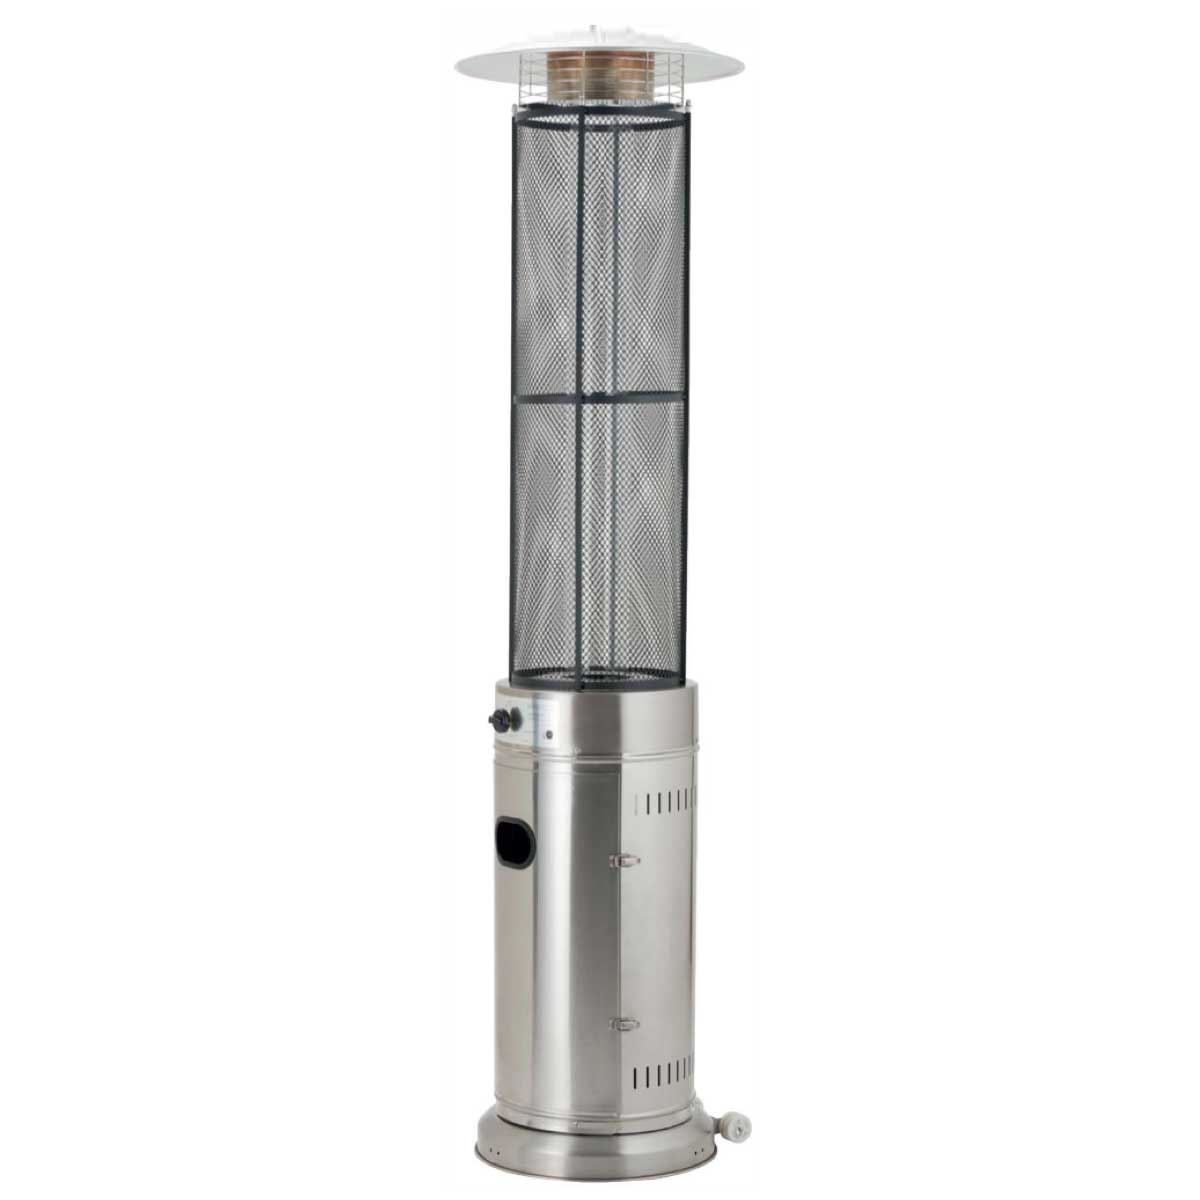 Lifestyle Emporio 15kW Flame Heater - Glowing Flames